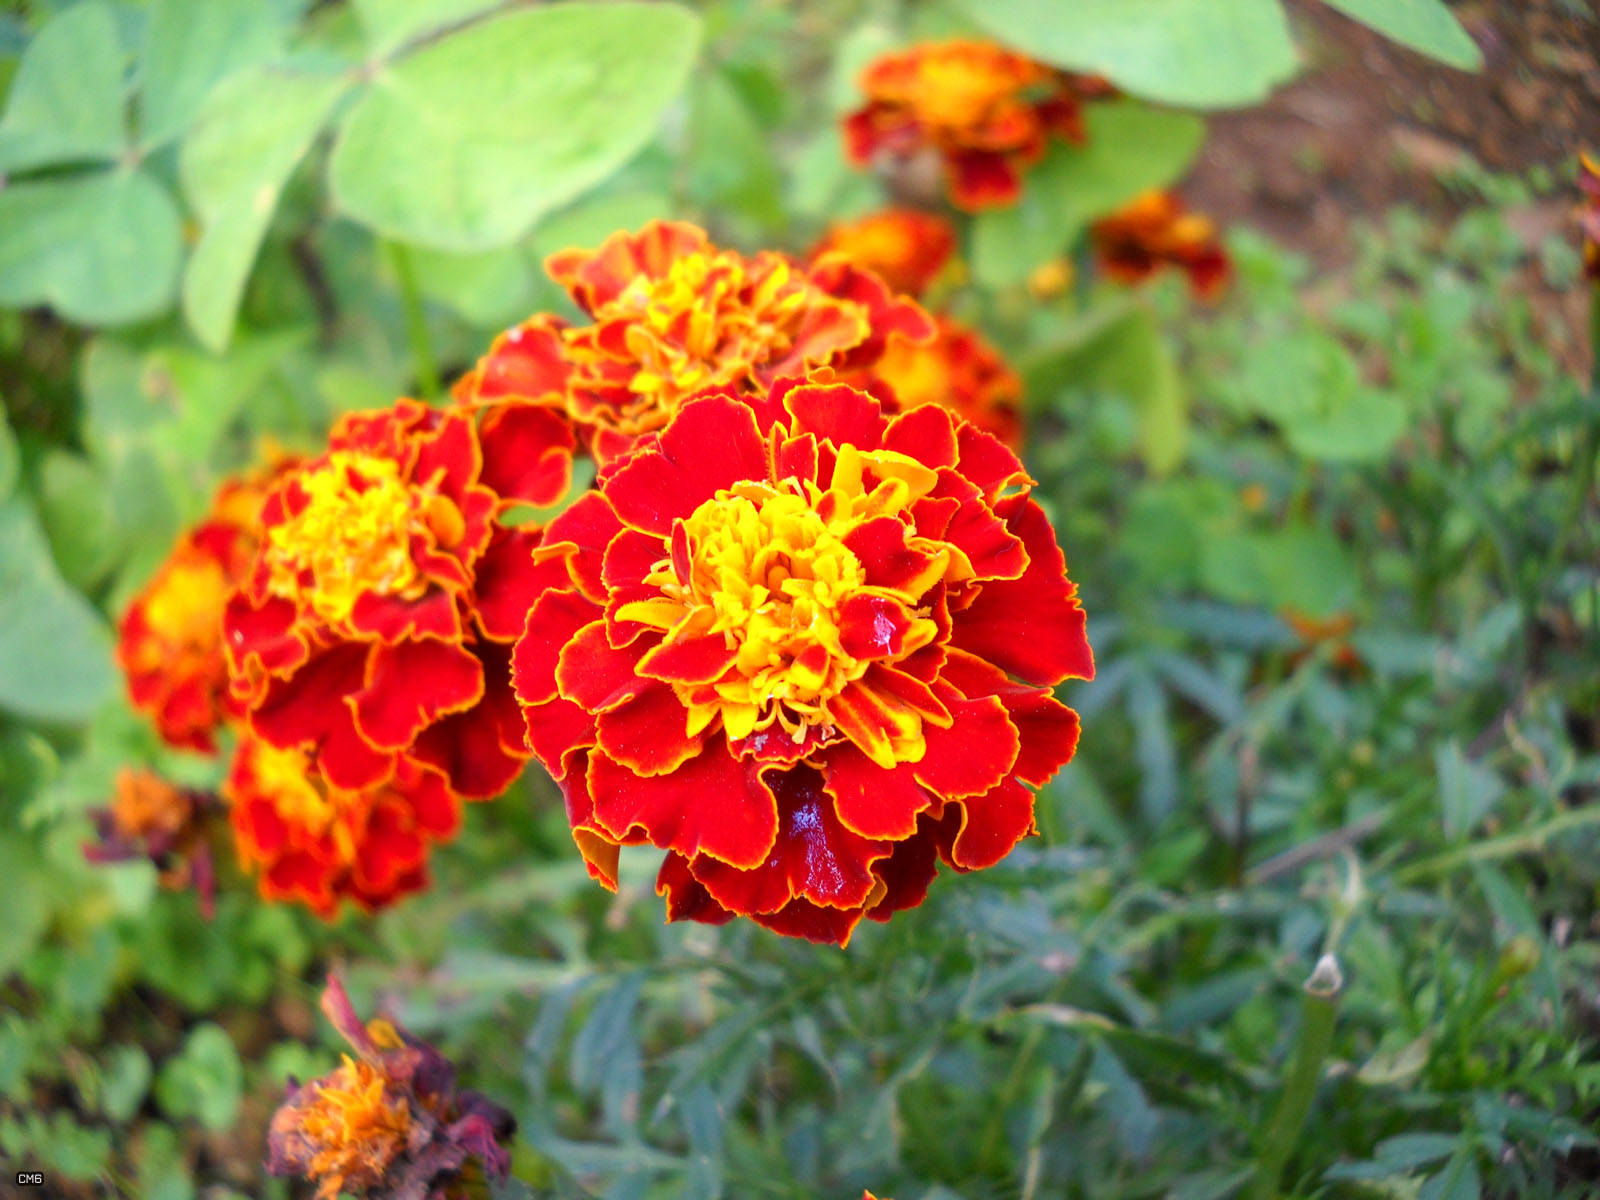 File:Tagetes cultivar red and yellow 8399.jpg - Wikimedia Commons